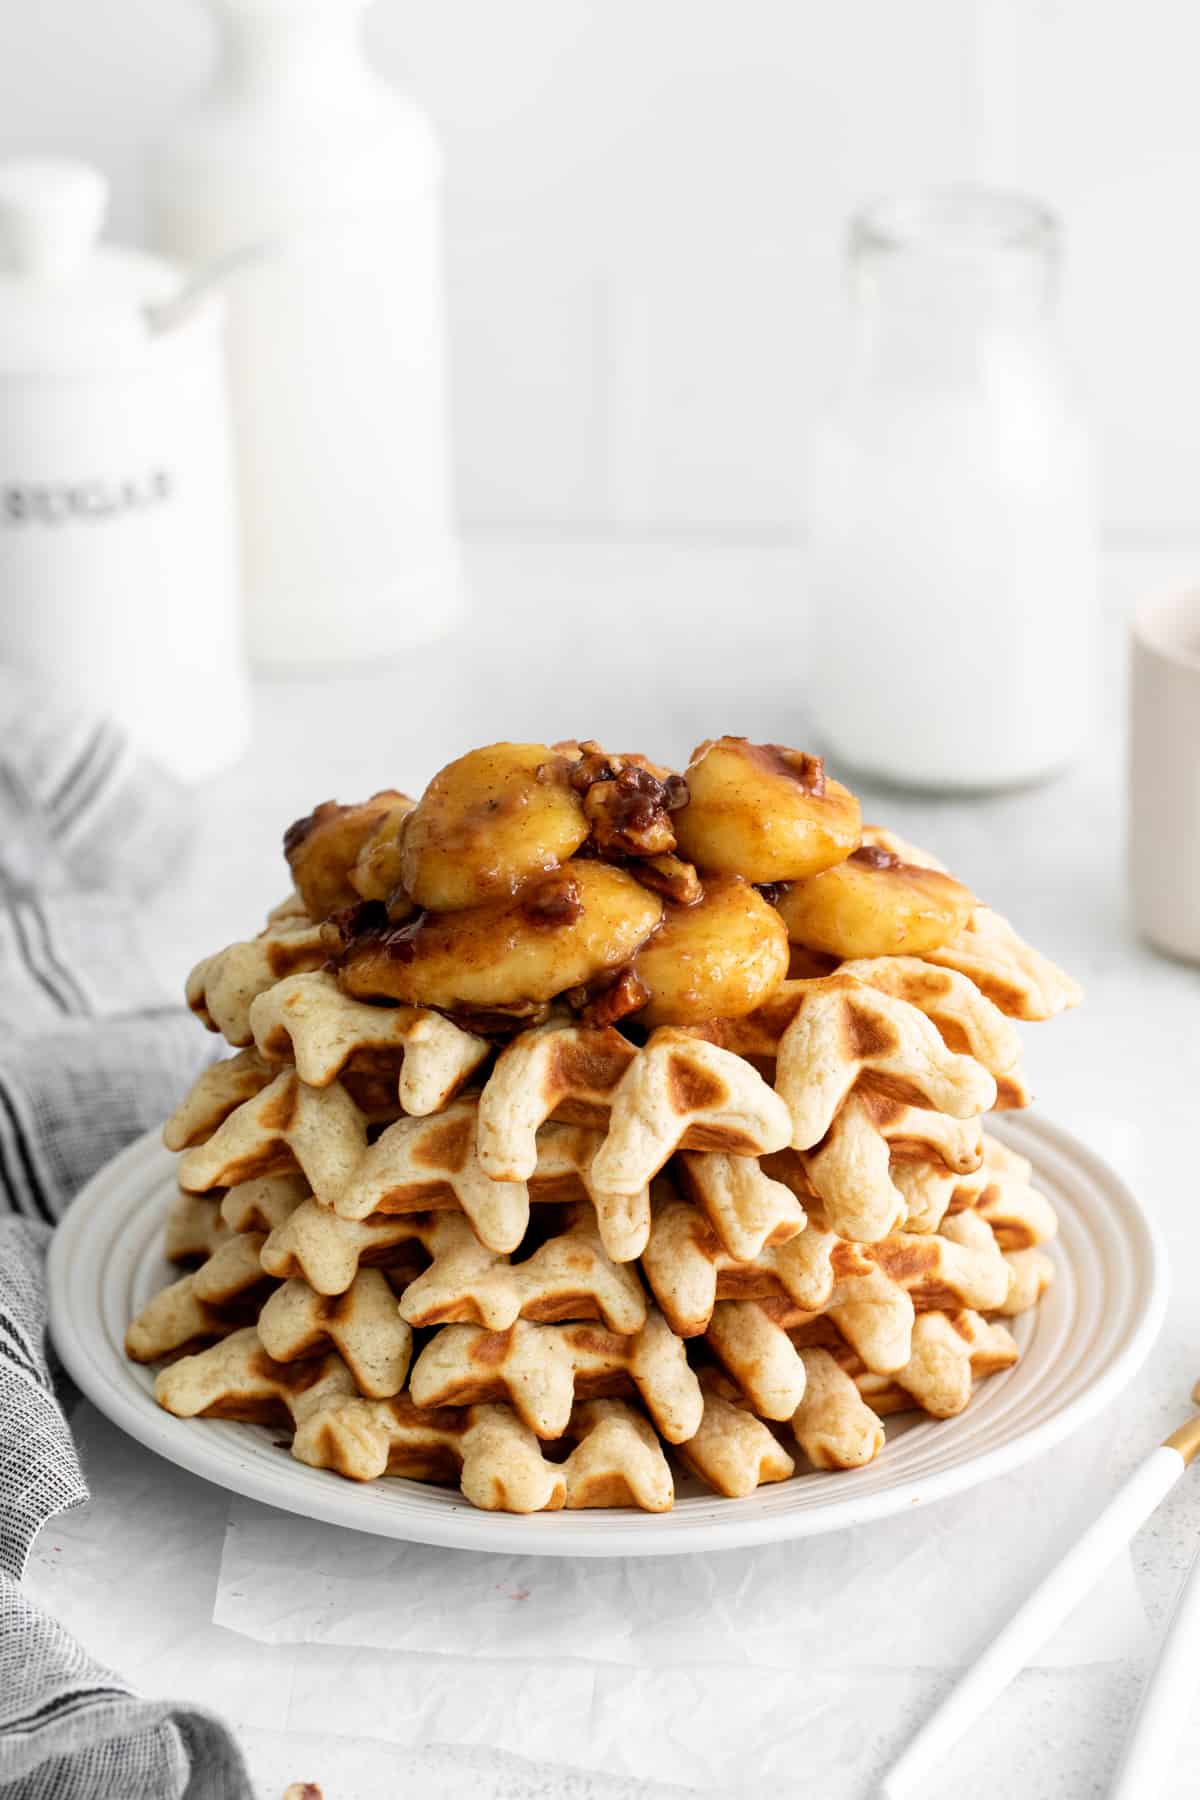 a stack of bananas foster waffles on a plate